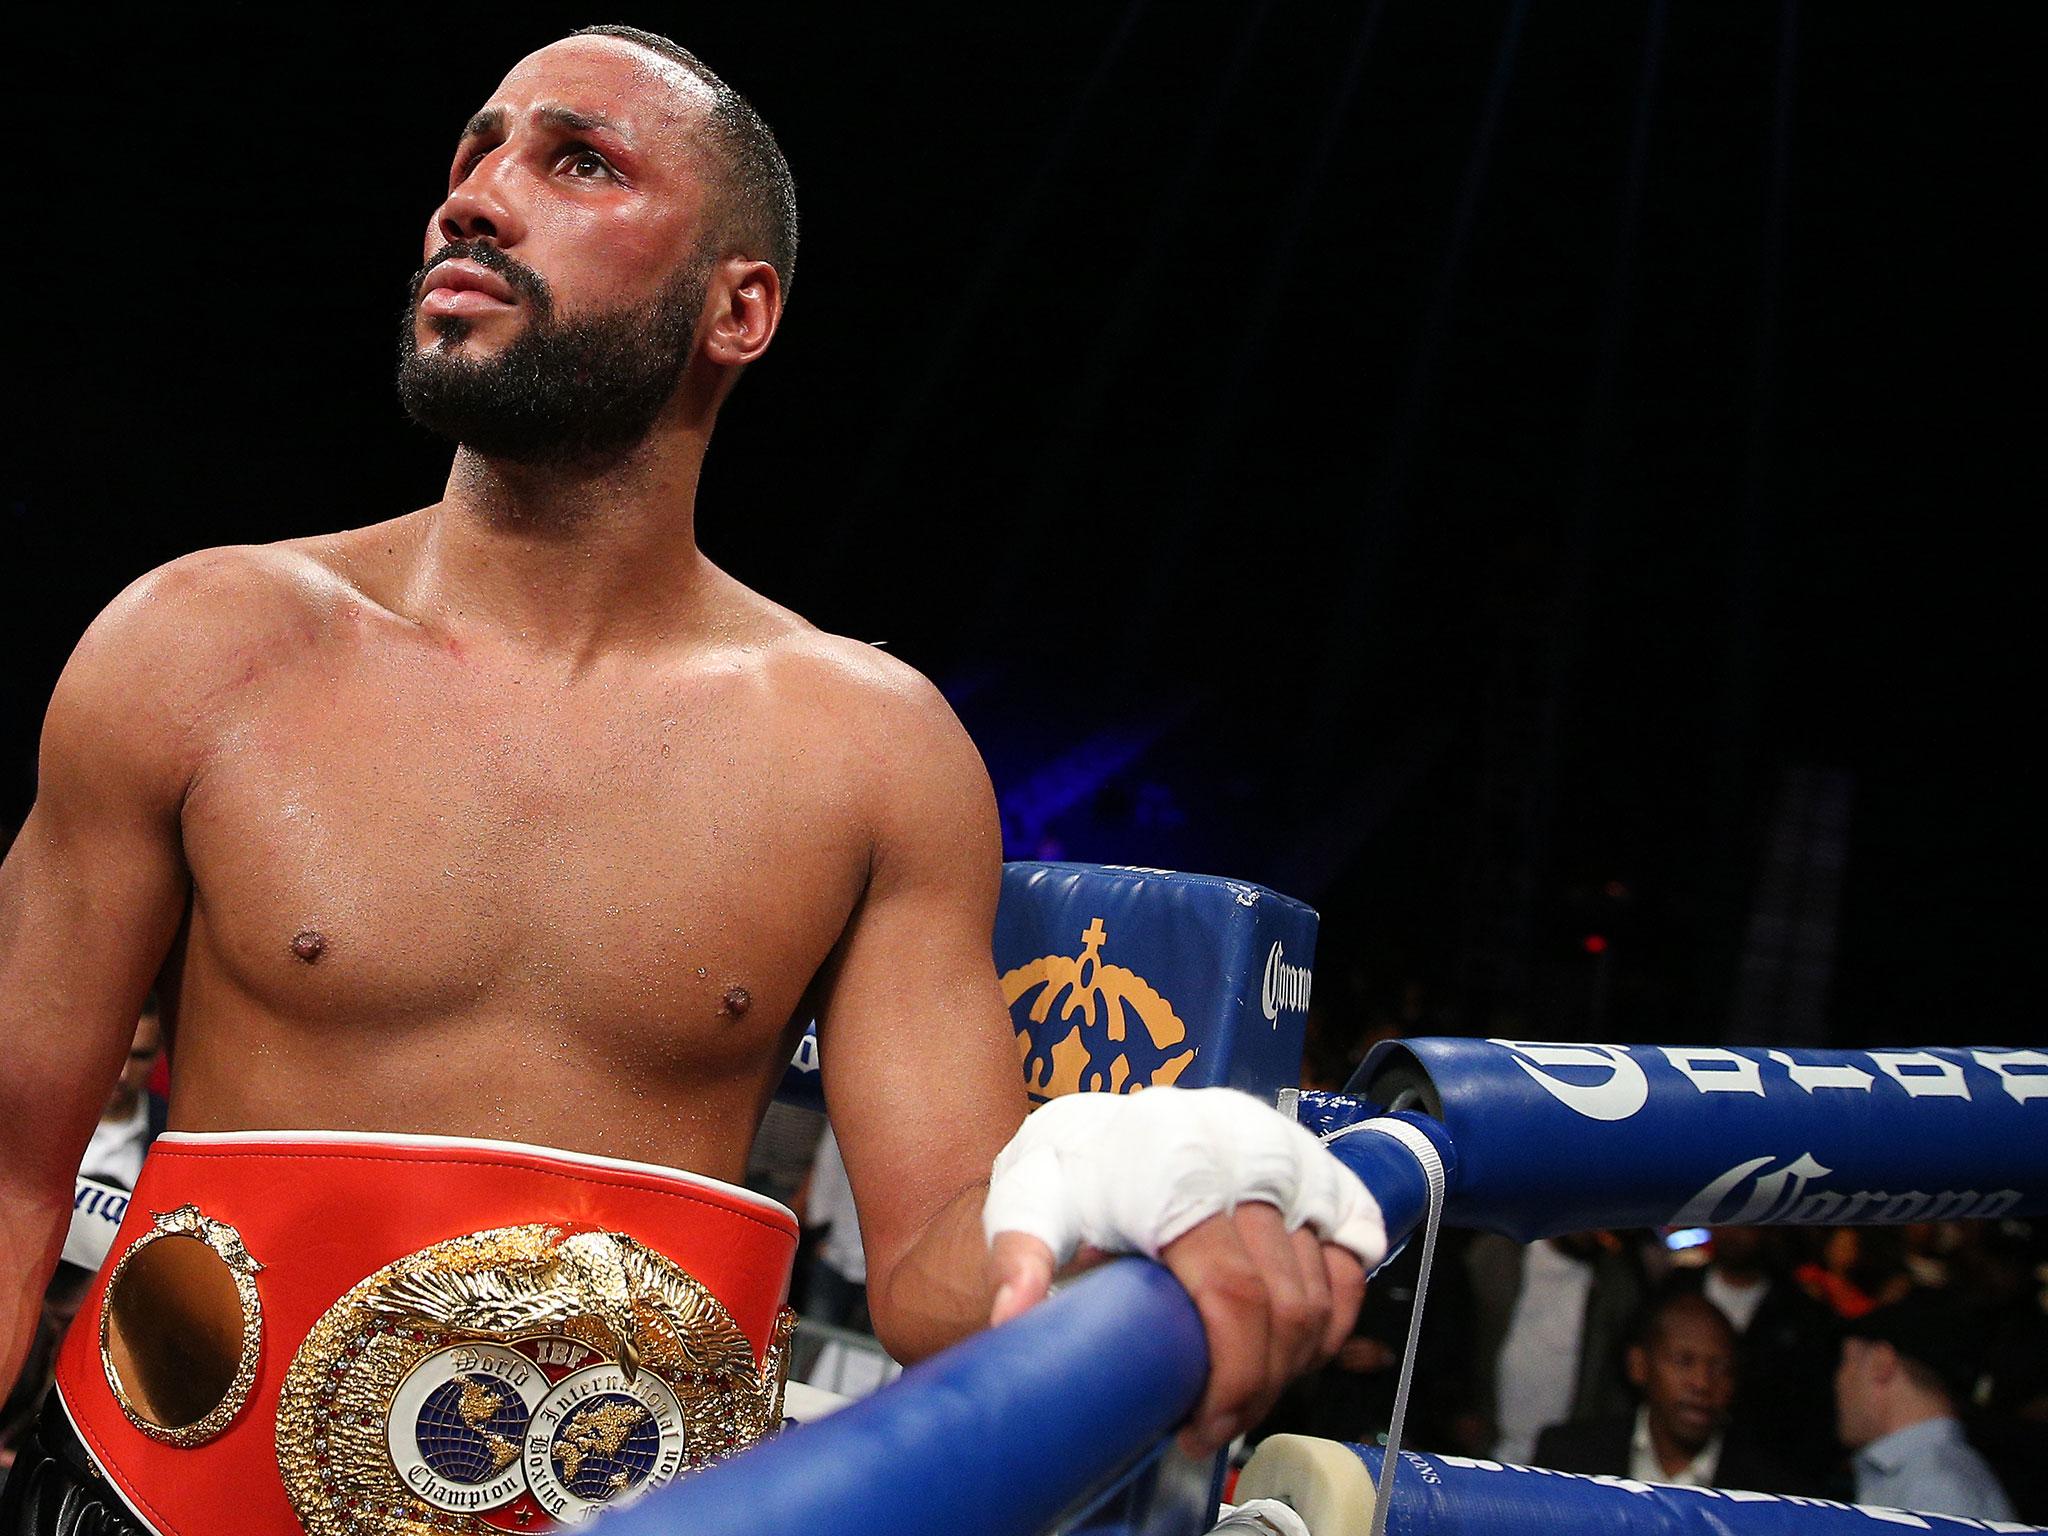 DeGale has been called out by compatriot Eubank Jnr